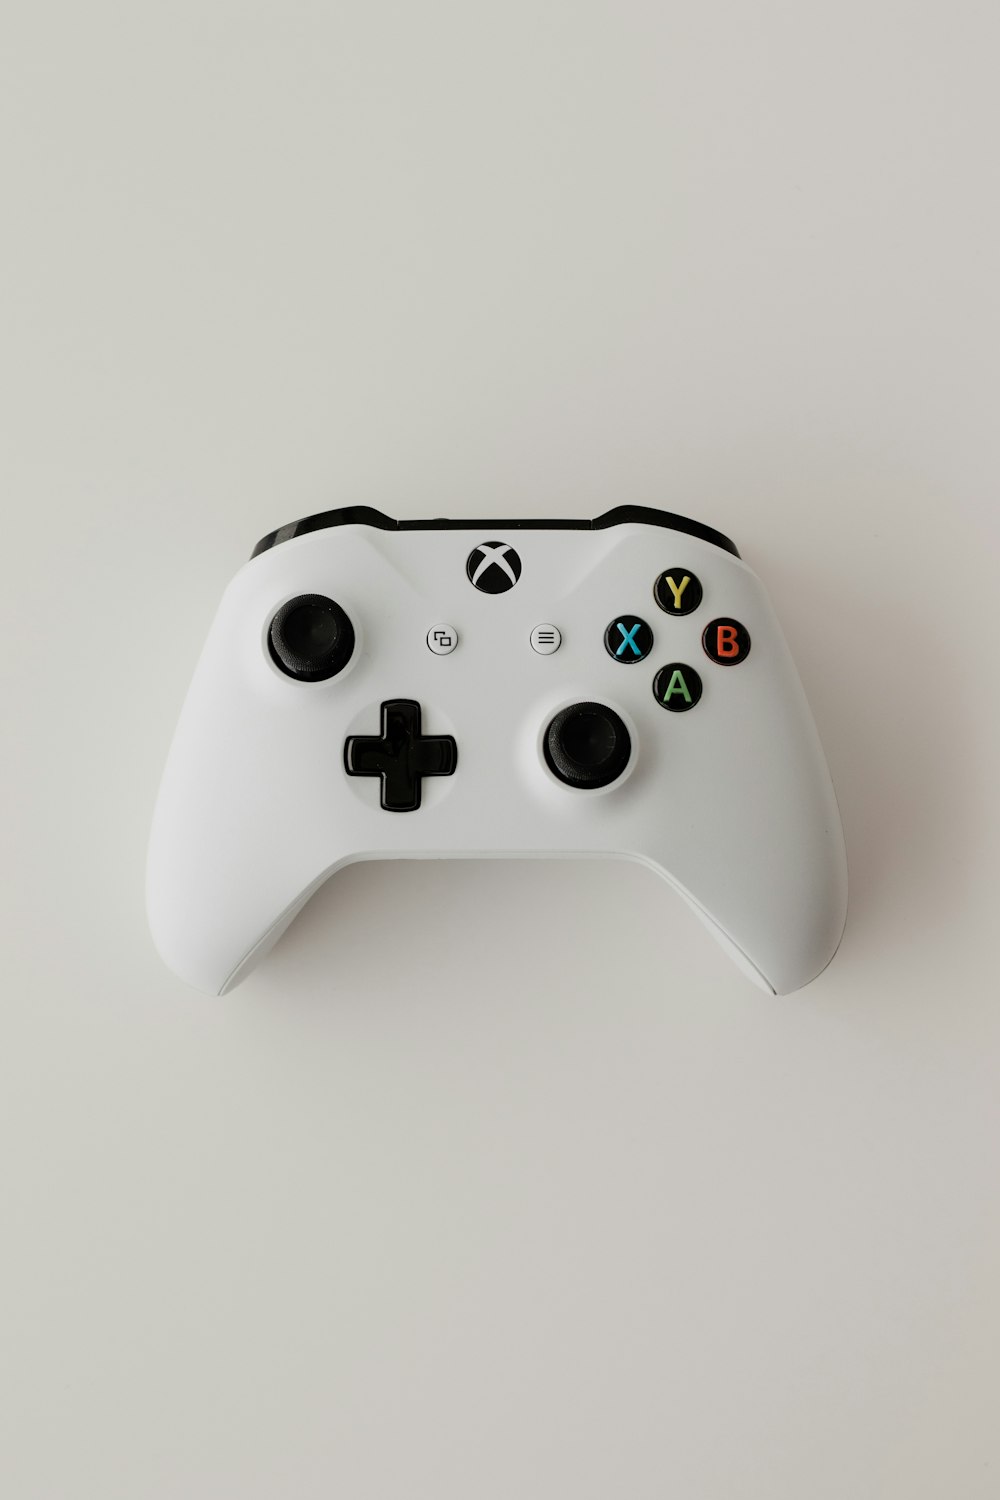 Xbox Controller Pictures Download Free Images On Unsplash